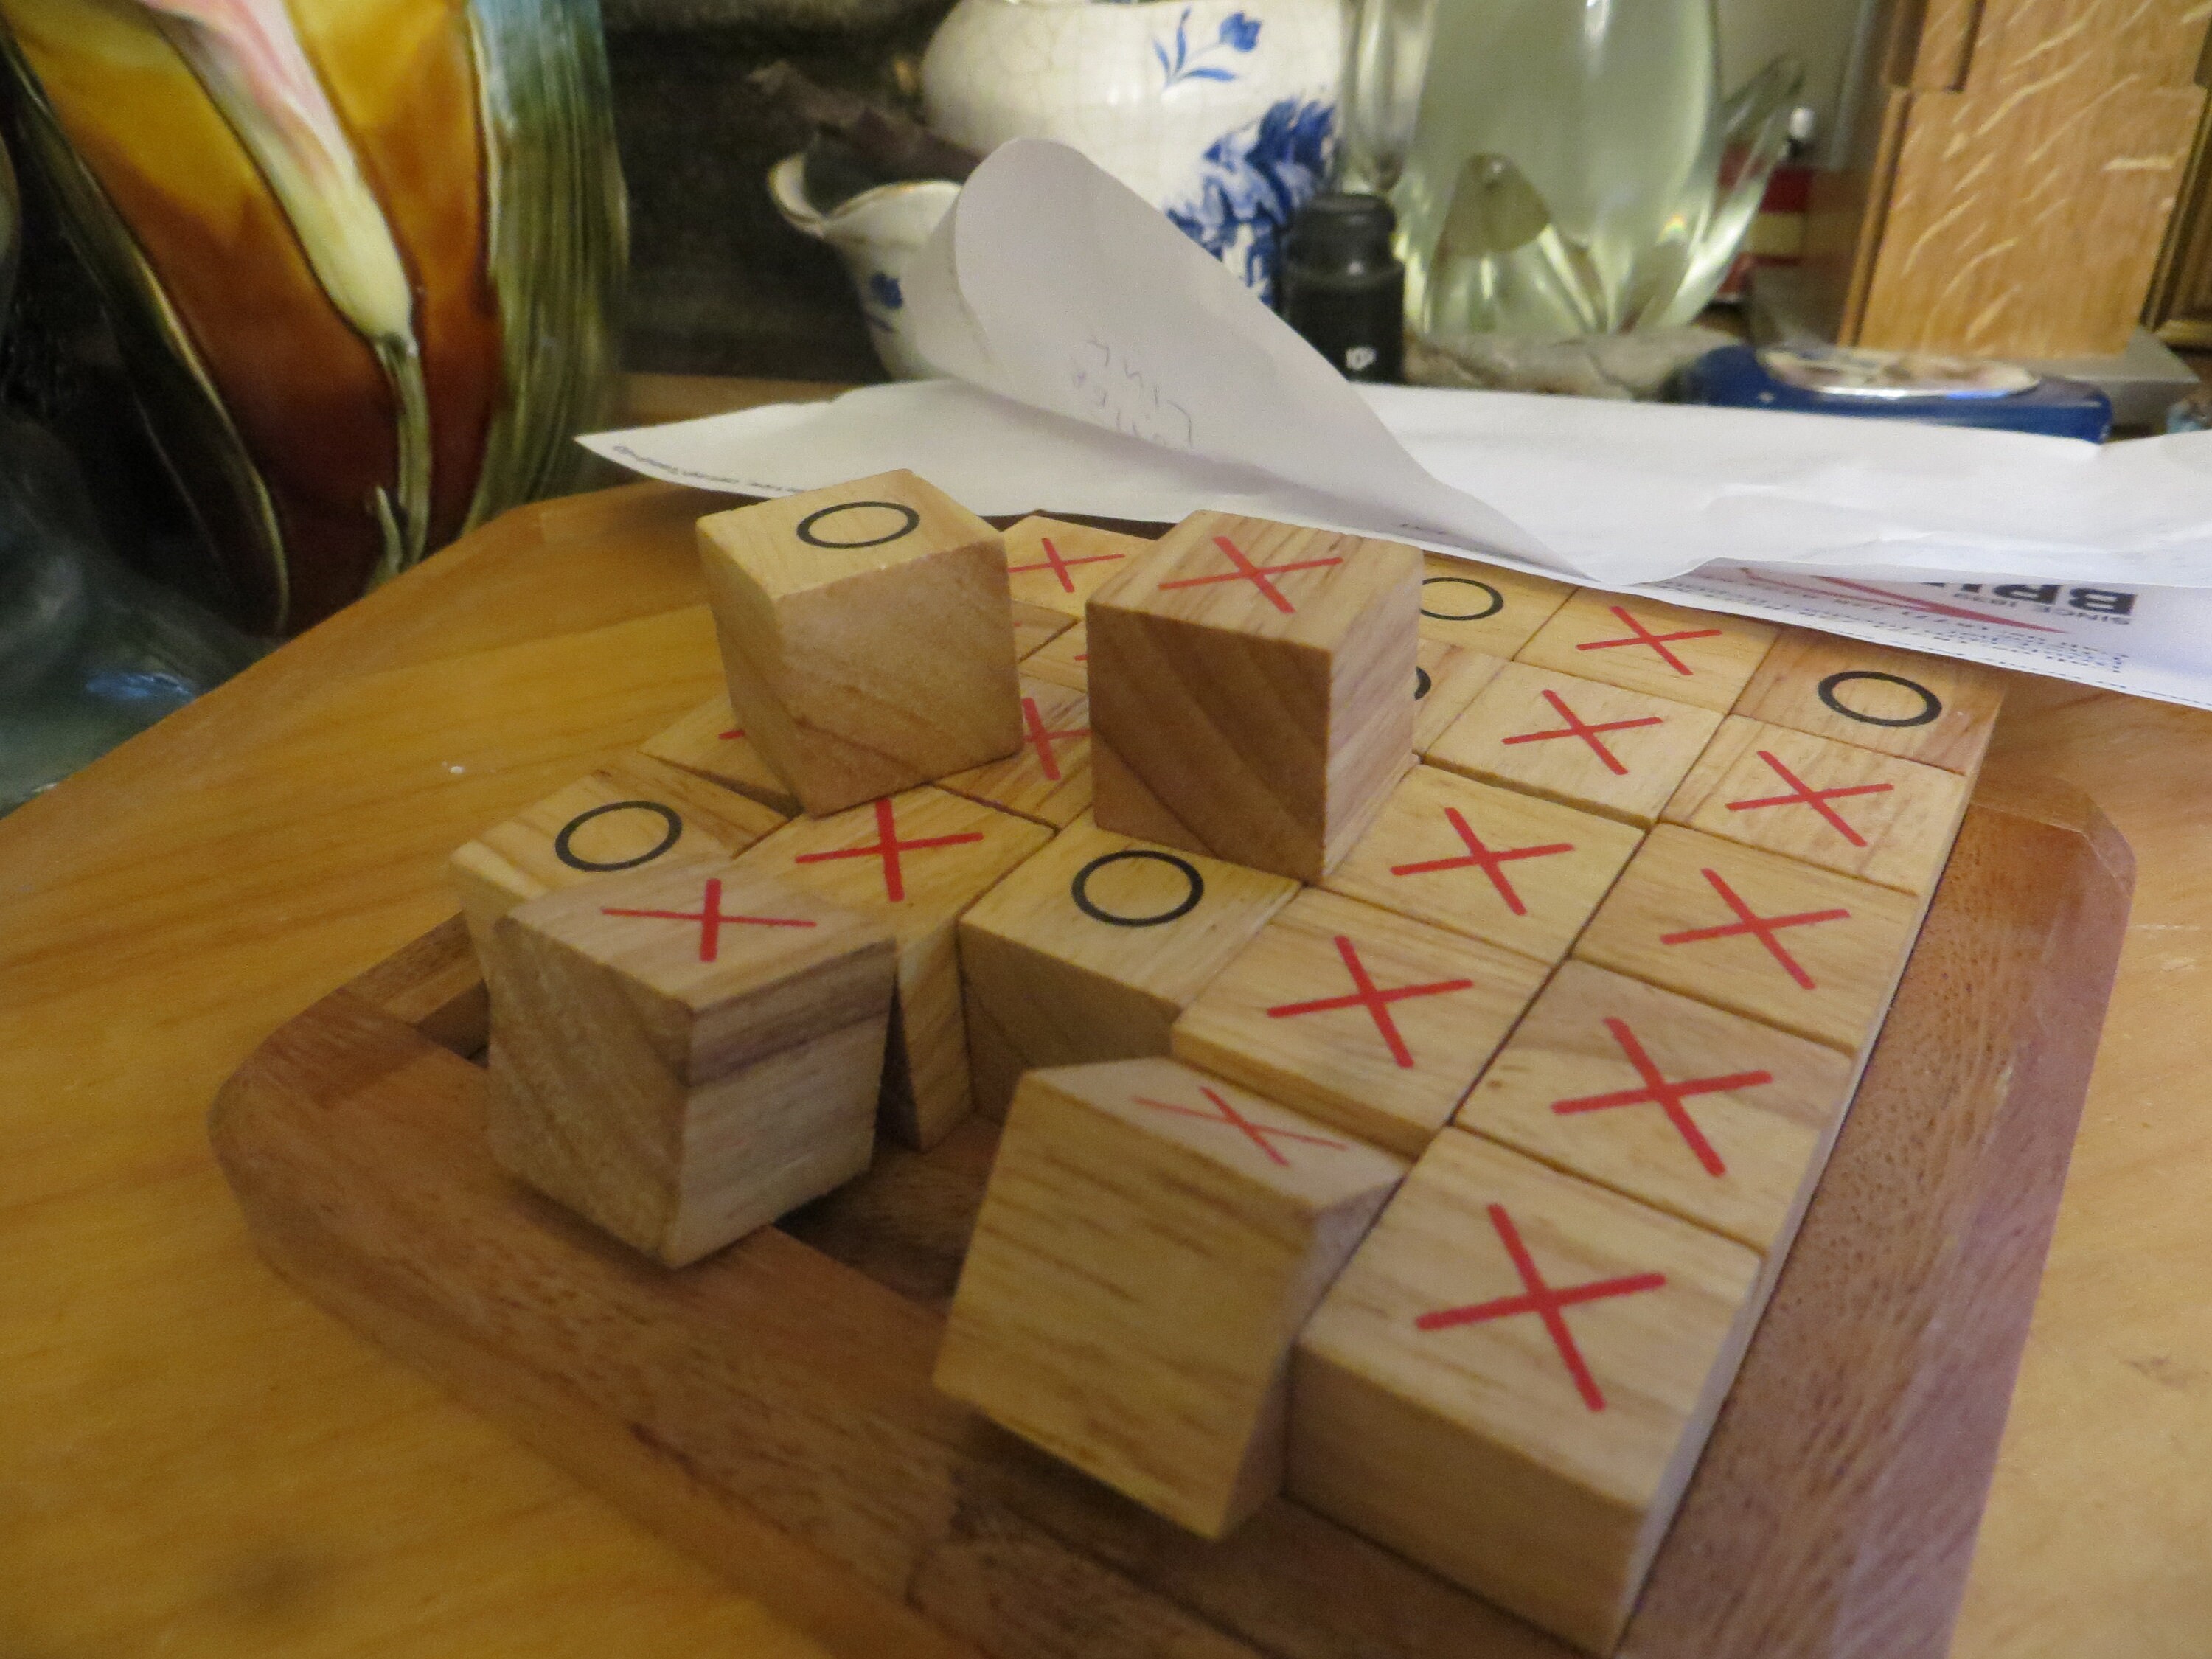 XOXO - Tic Tac Toe, Noughts and Crosses, Xs & Os Wooden Board Game (5x5), Shop Today. Get it Tomorrow!